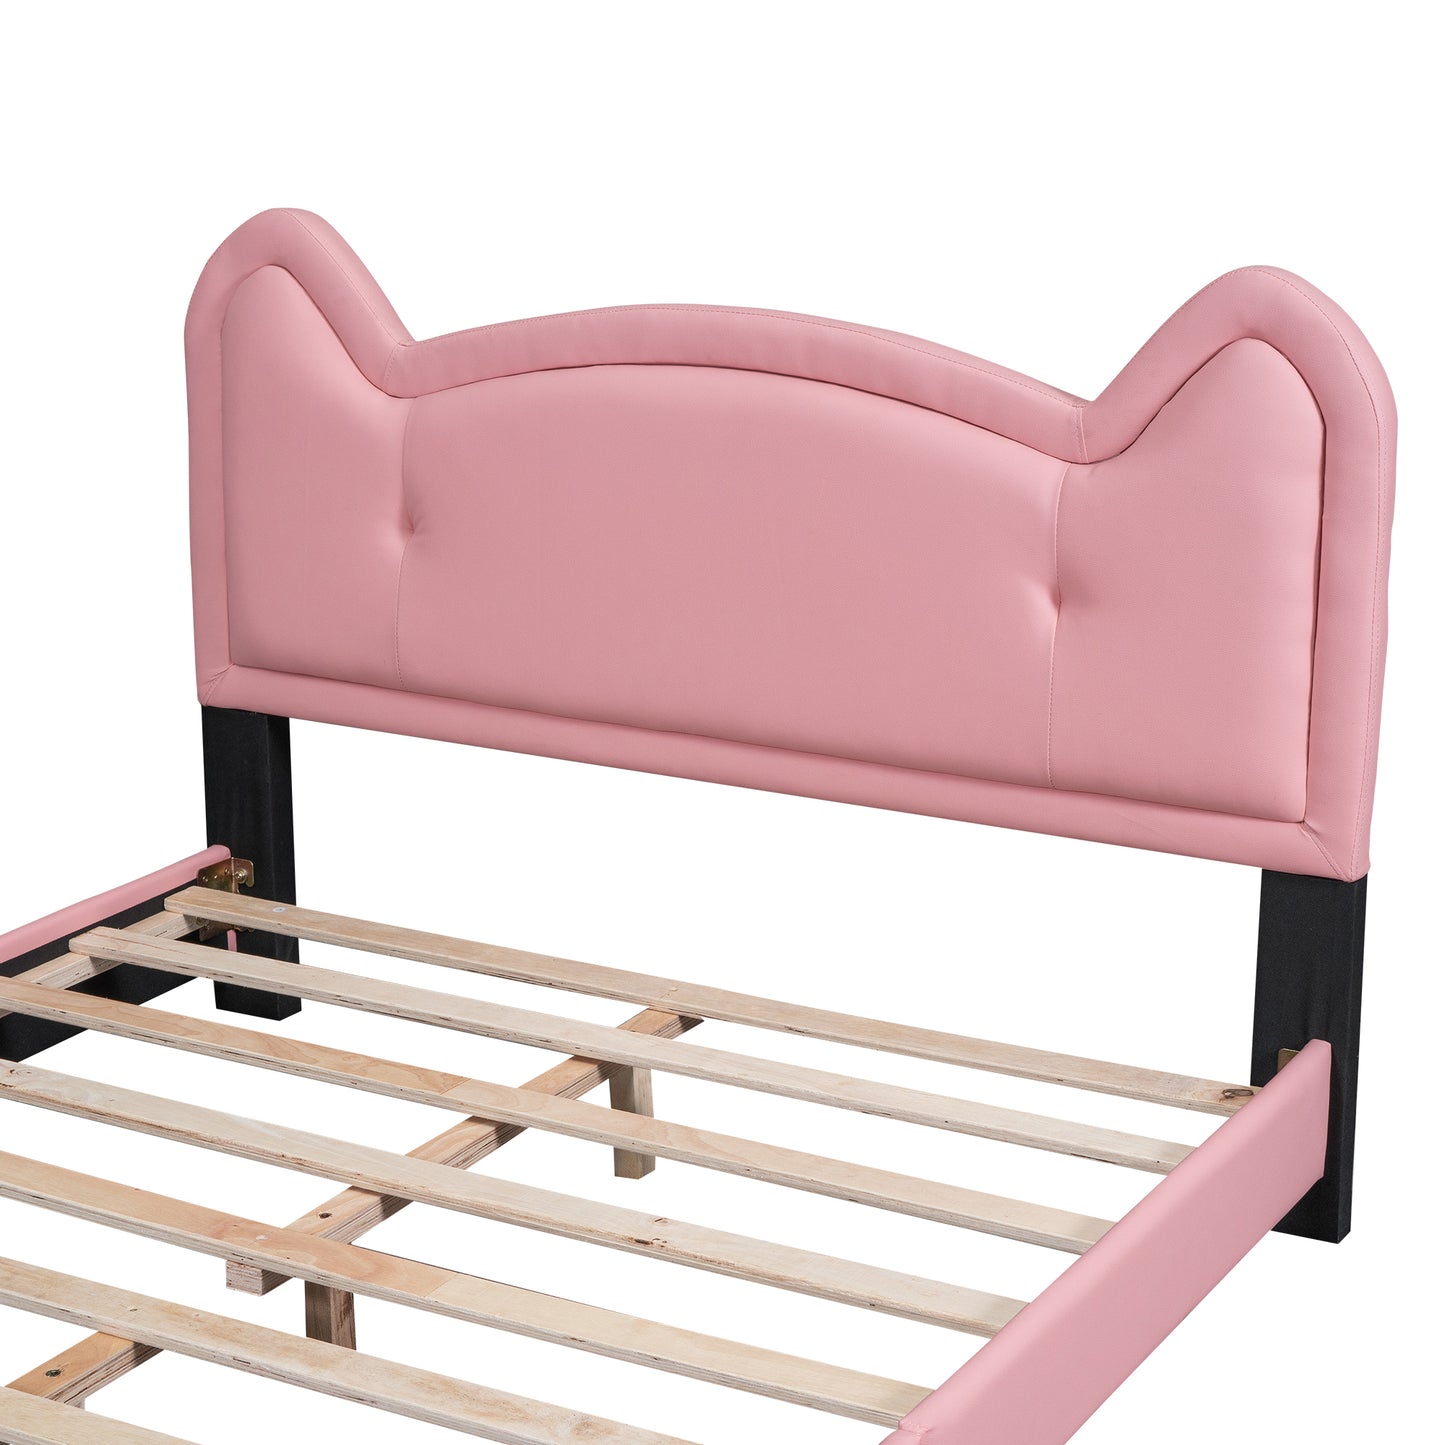 Full Size Upholstered Platform Bed with Carton Ears Shaped Headboard, Pink